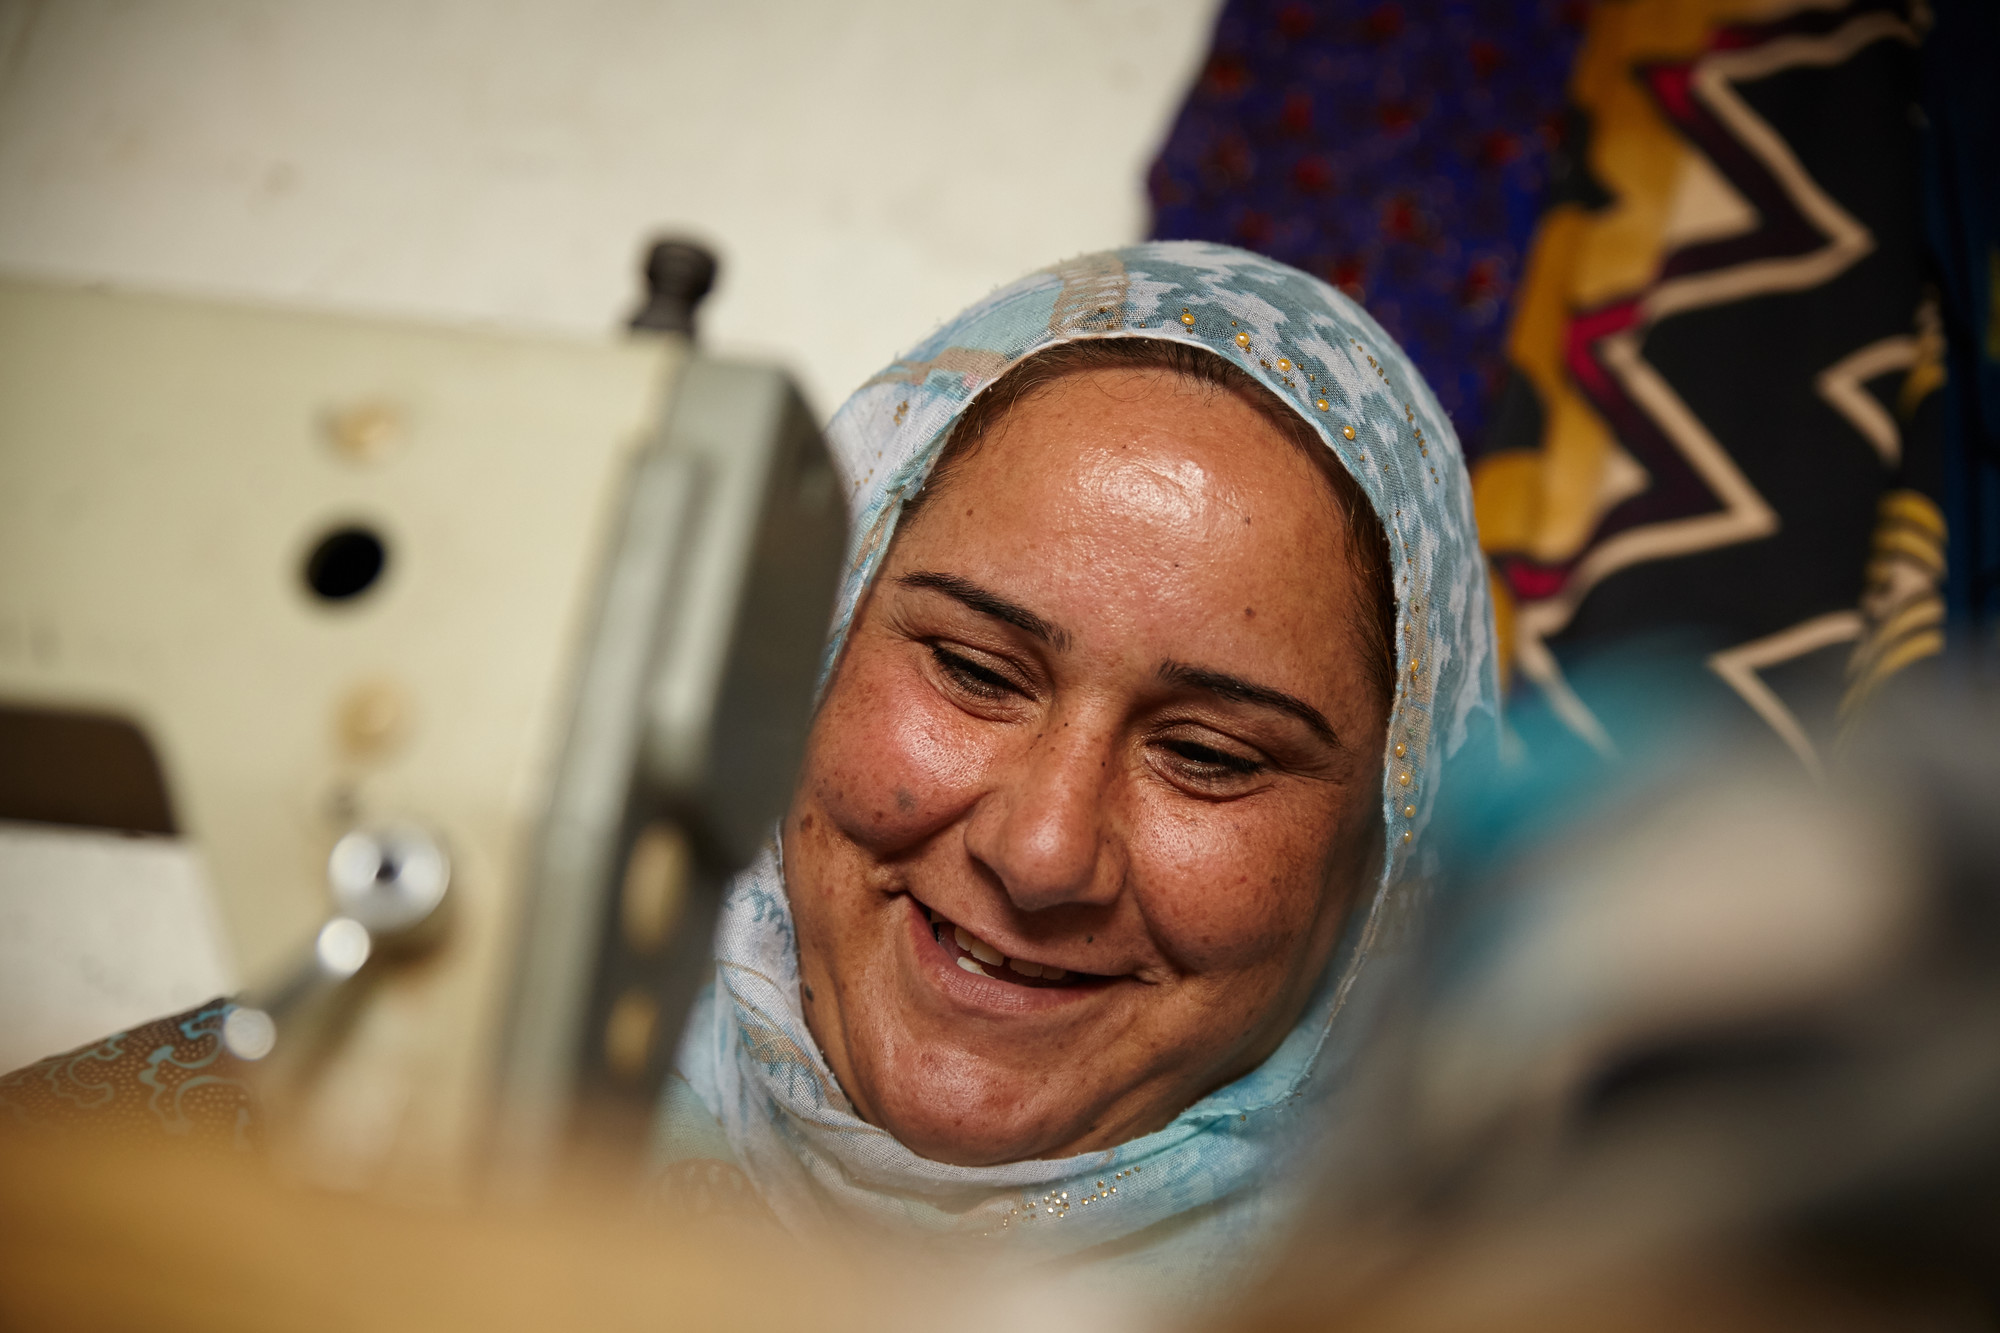 Shireen is a Syrian refugee living in Erbil, Iraq, with her 7 children and her husband. She is a talented tailor and she would like to start a sewing business in her home. Photo: Aidan O'Neill 